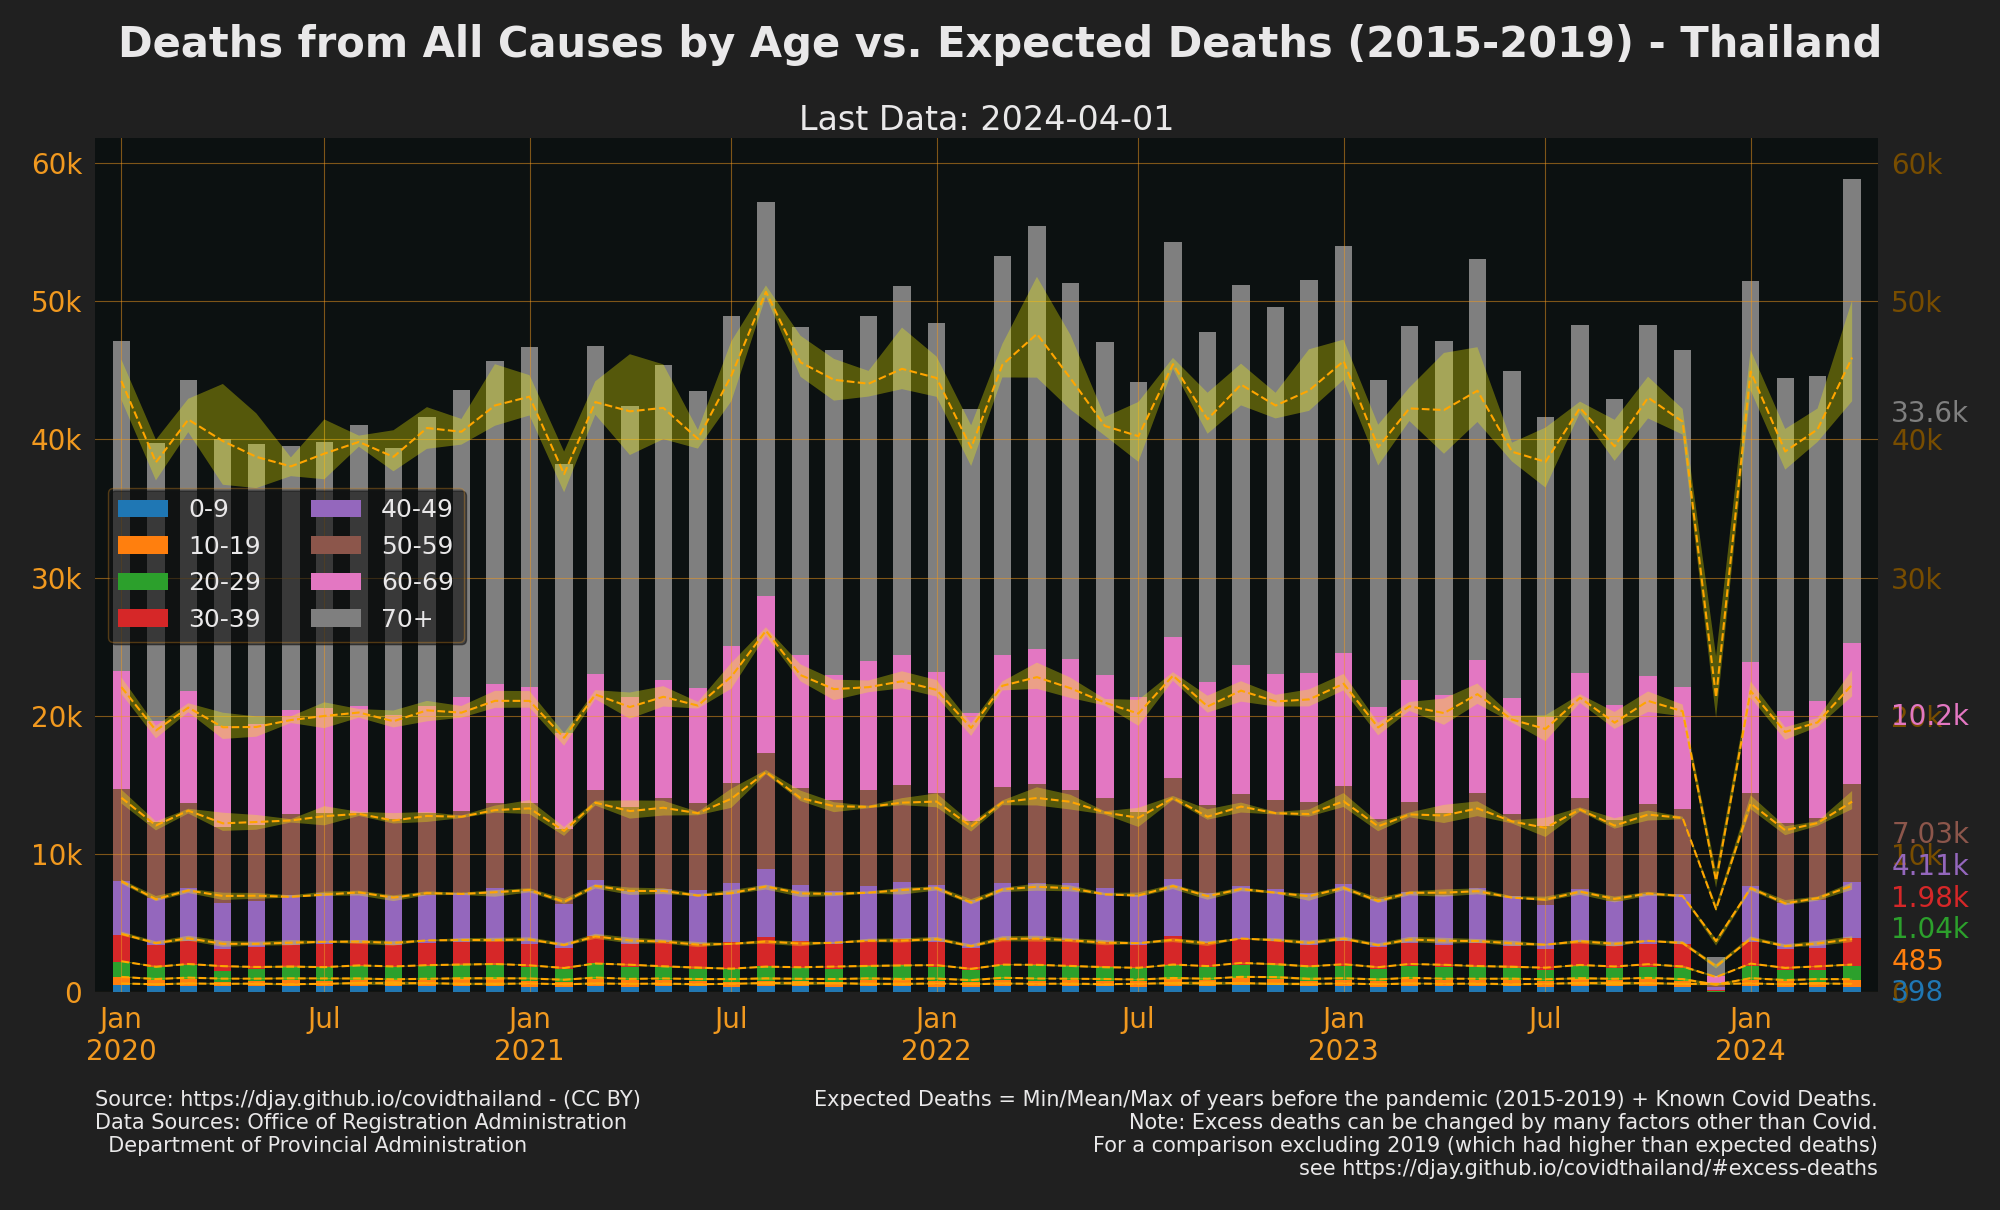 Thailand Excess Deaths by Age